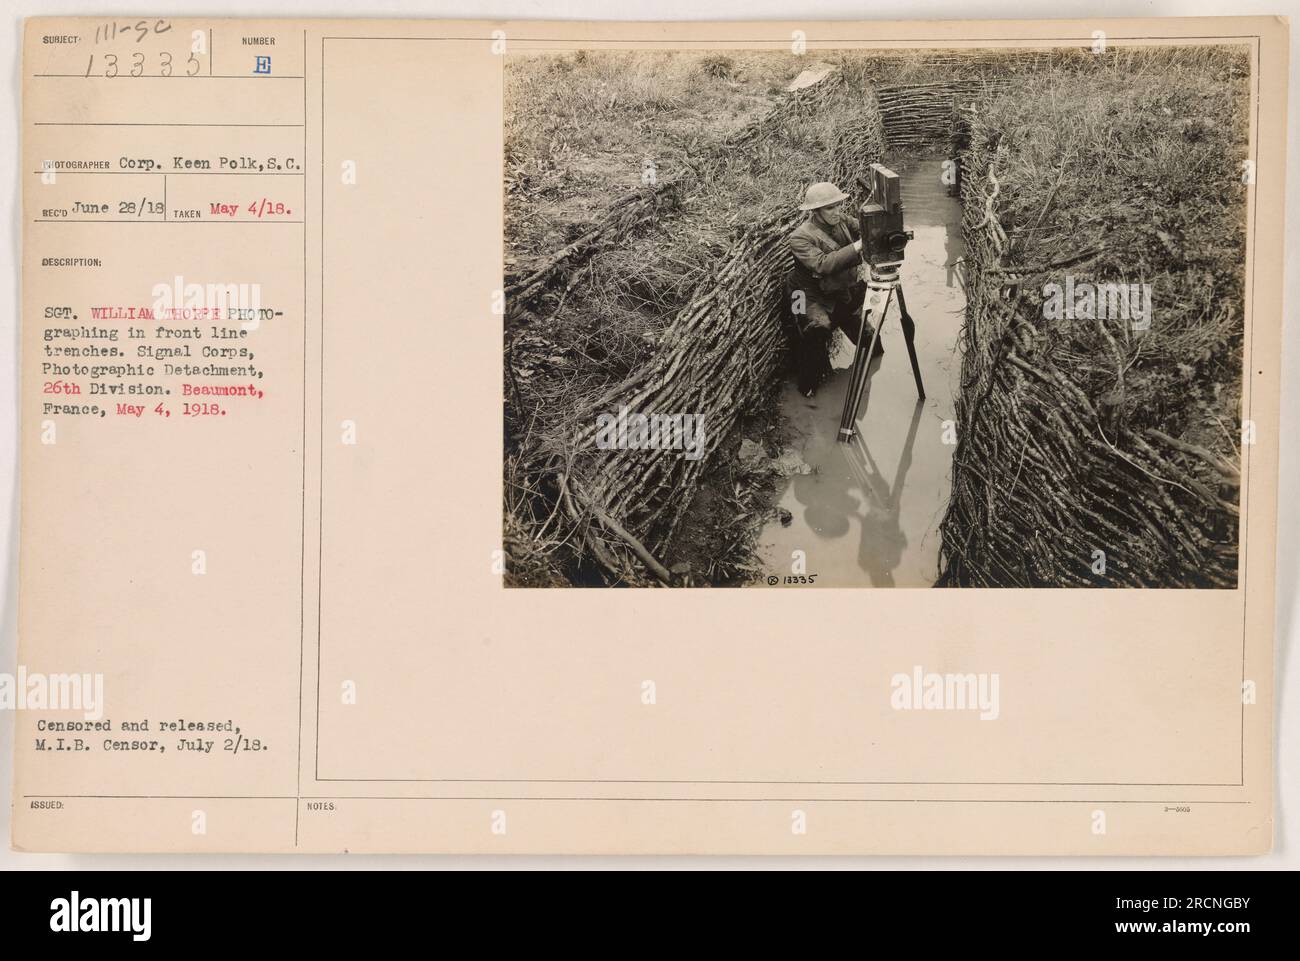 Stg. William Thorpe, a photographer with the Signal Corps Photographic Detachment of the 26th Division, is shown photographing in front line trenches in Beaumont, France on May 4, 1918. This image is part of the Photographs of American Military Activities during World War One collection and was censored and released by the M.I.B. Censor on July 2, 1918. Stock Photo